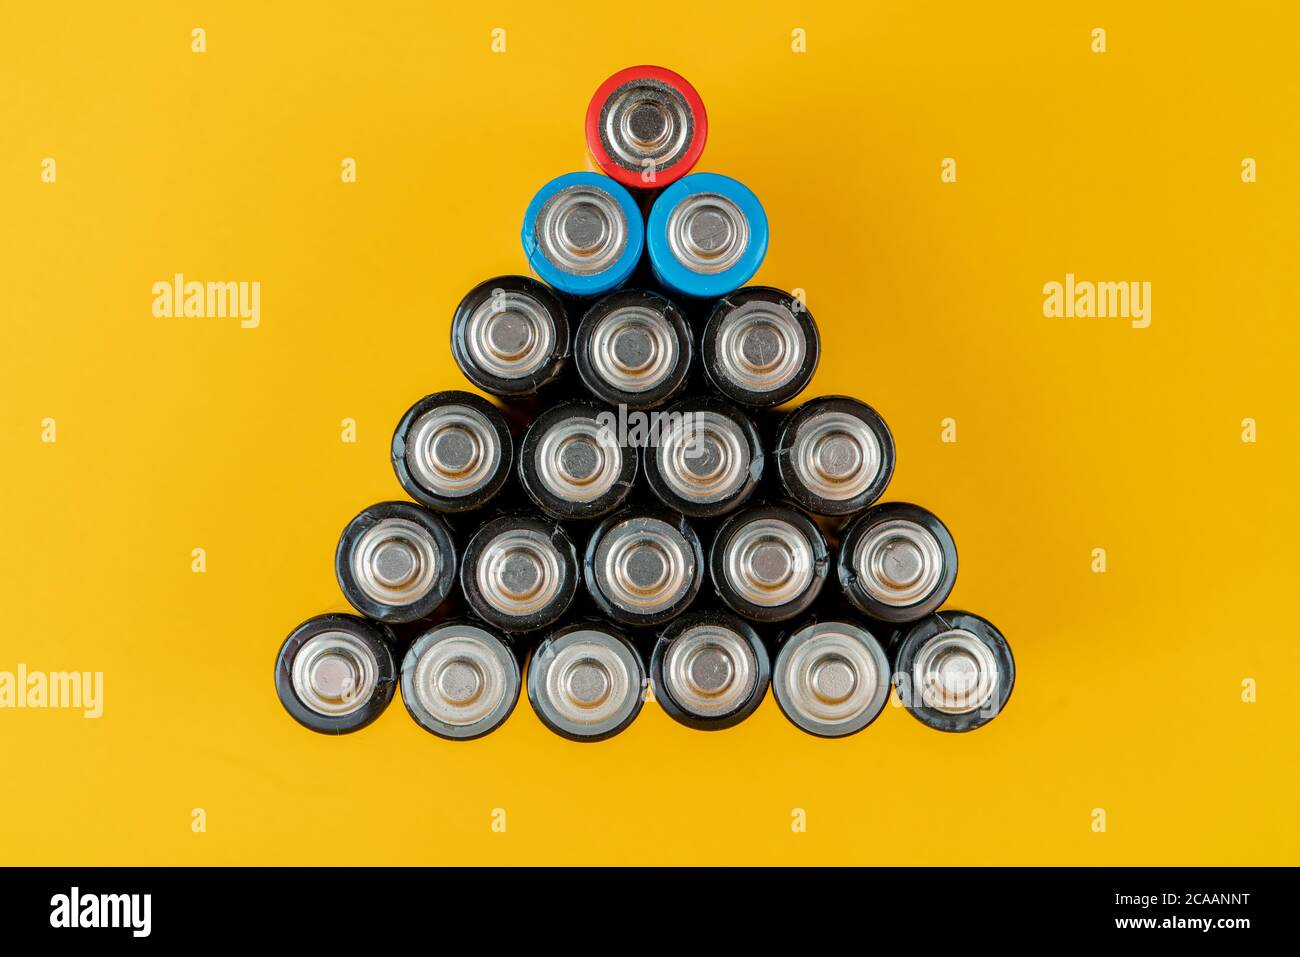 Top view of used batteries arranged in a triangle shape isolated on a yellow background Stock Photo